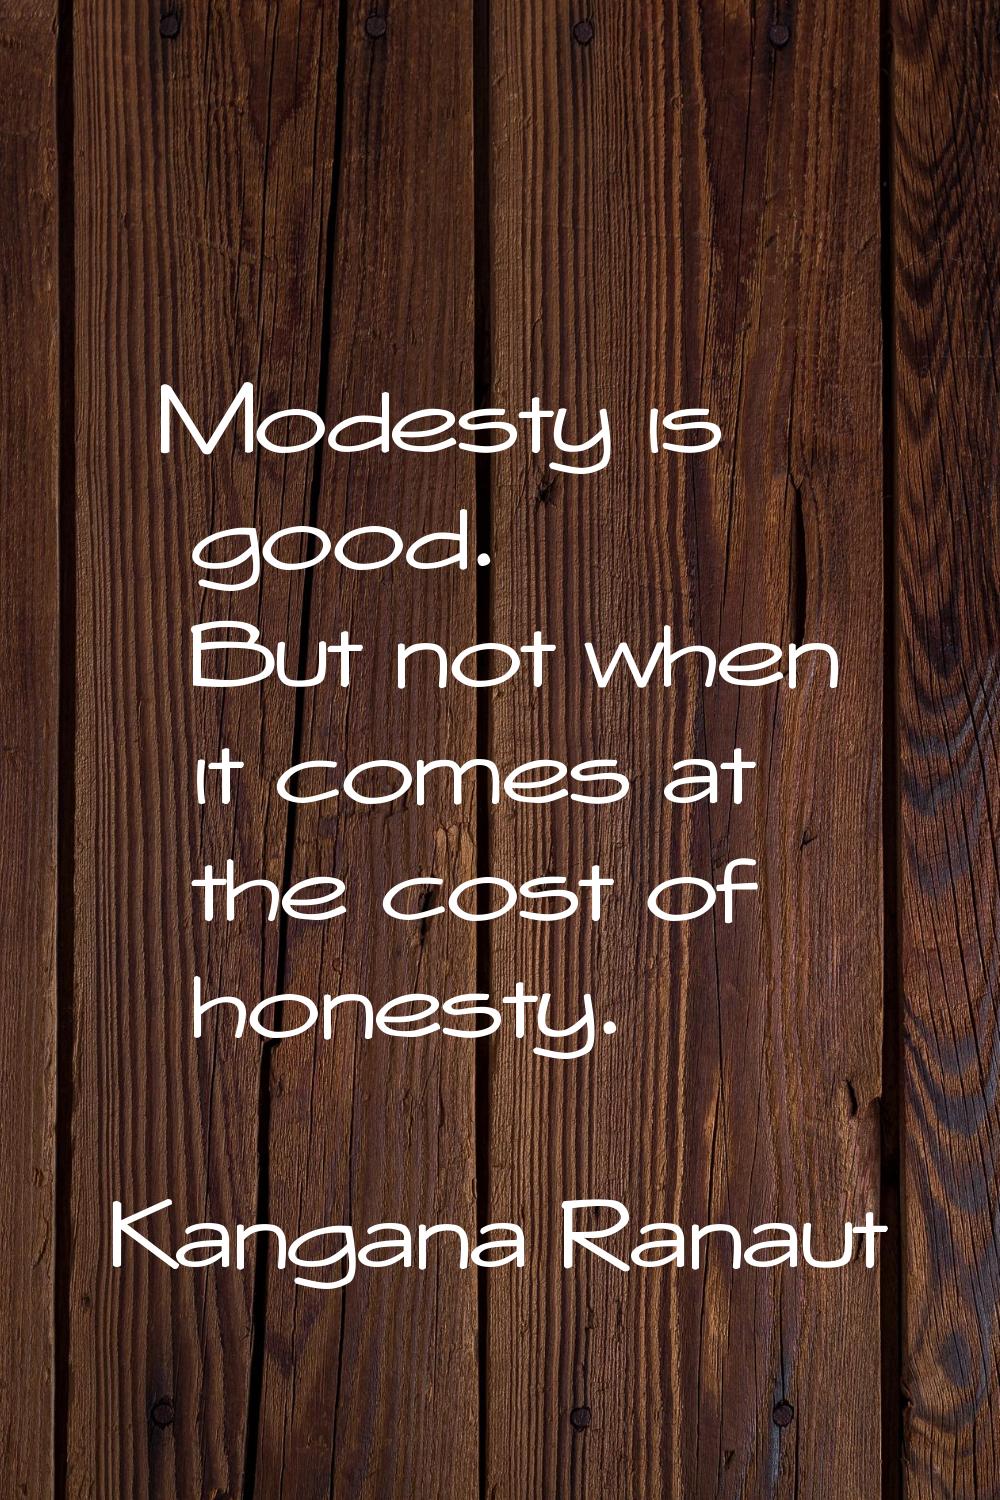 Modesty is good. But not when it comes at the cost of honesty.